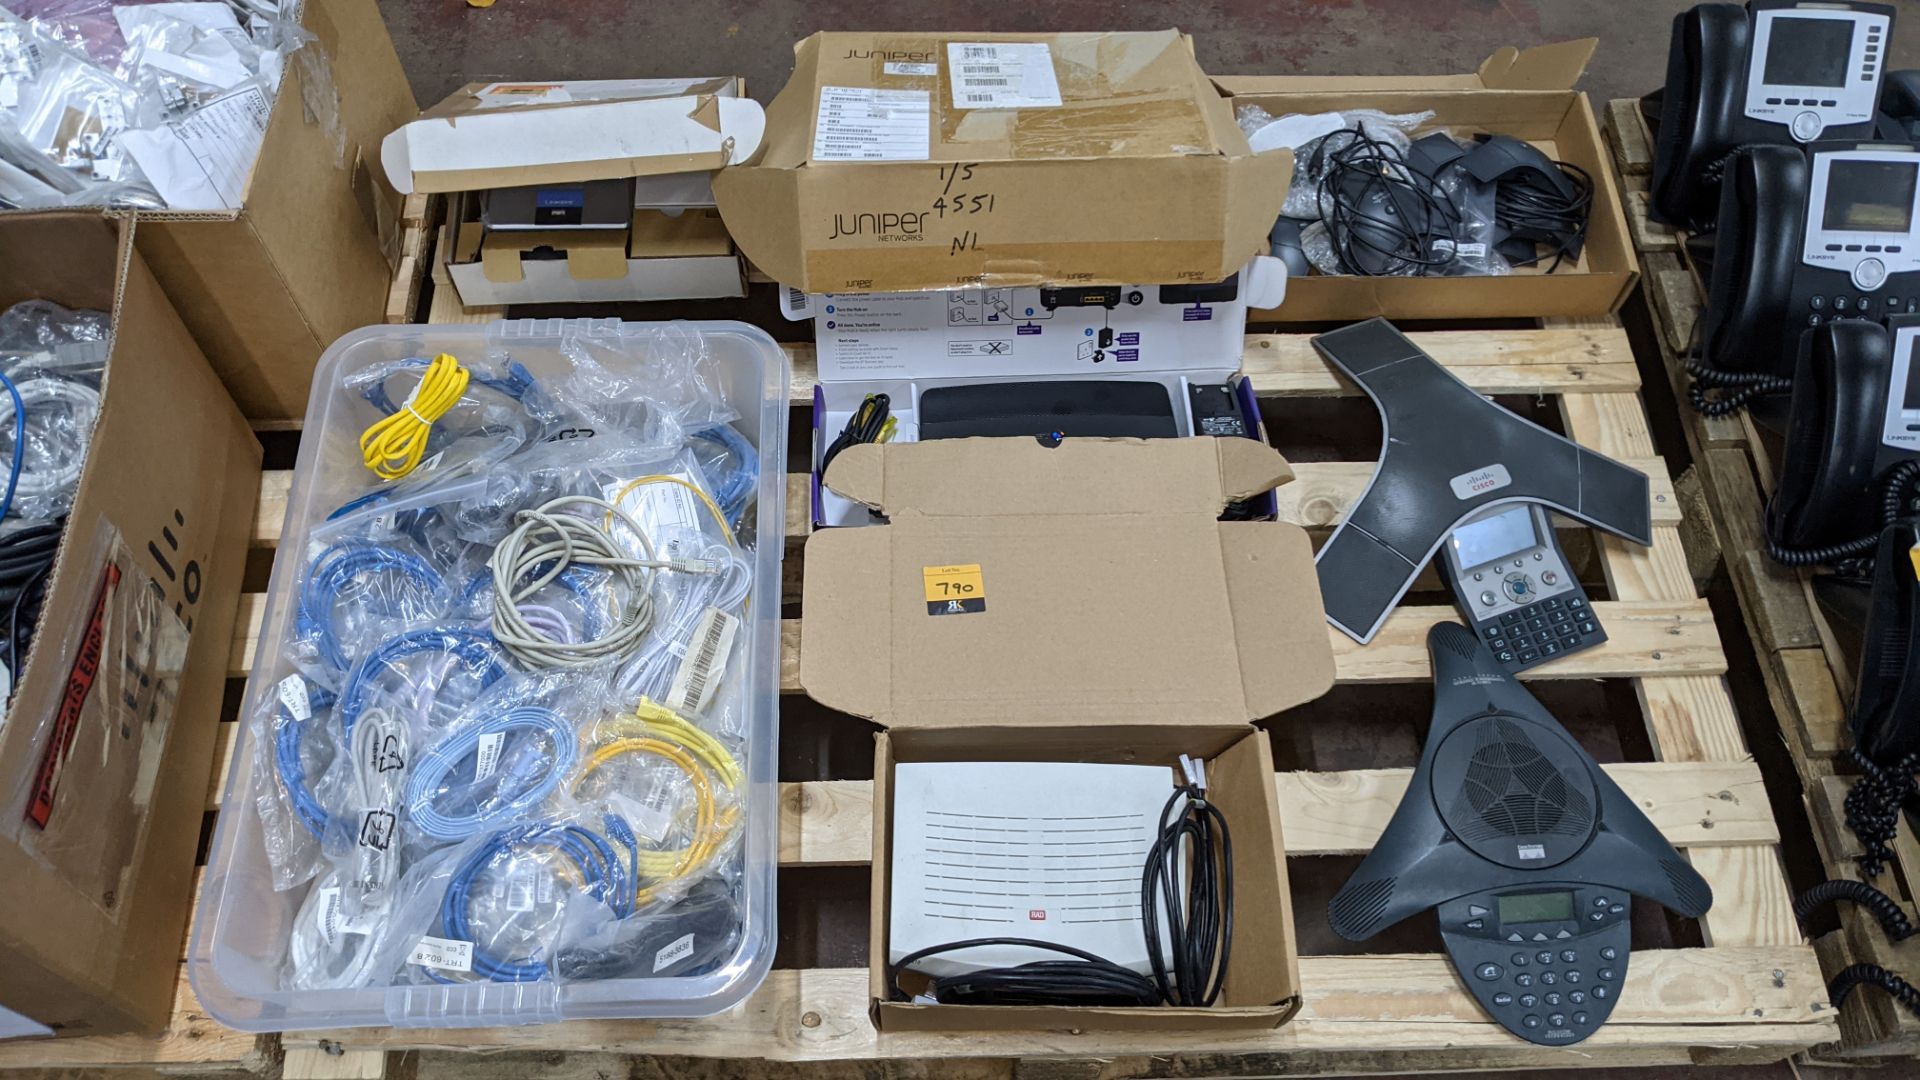 Contents of a pallet of assorted communications items including conference phones, cables, routers &